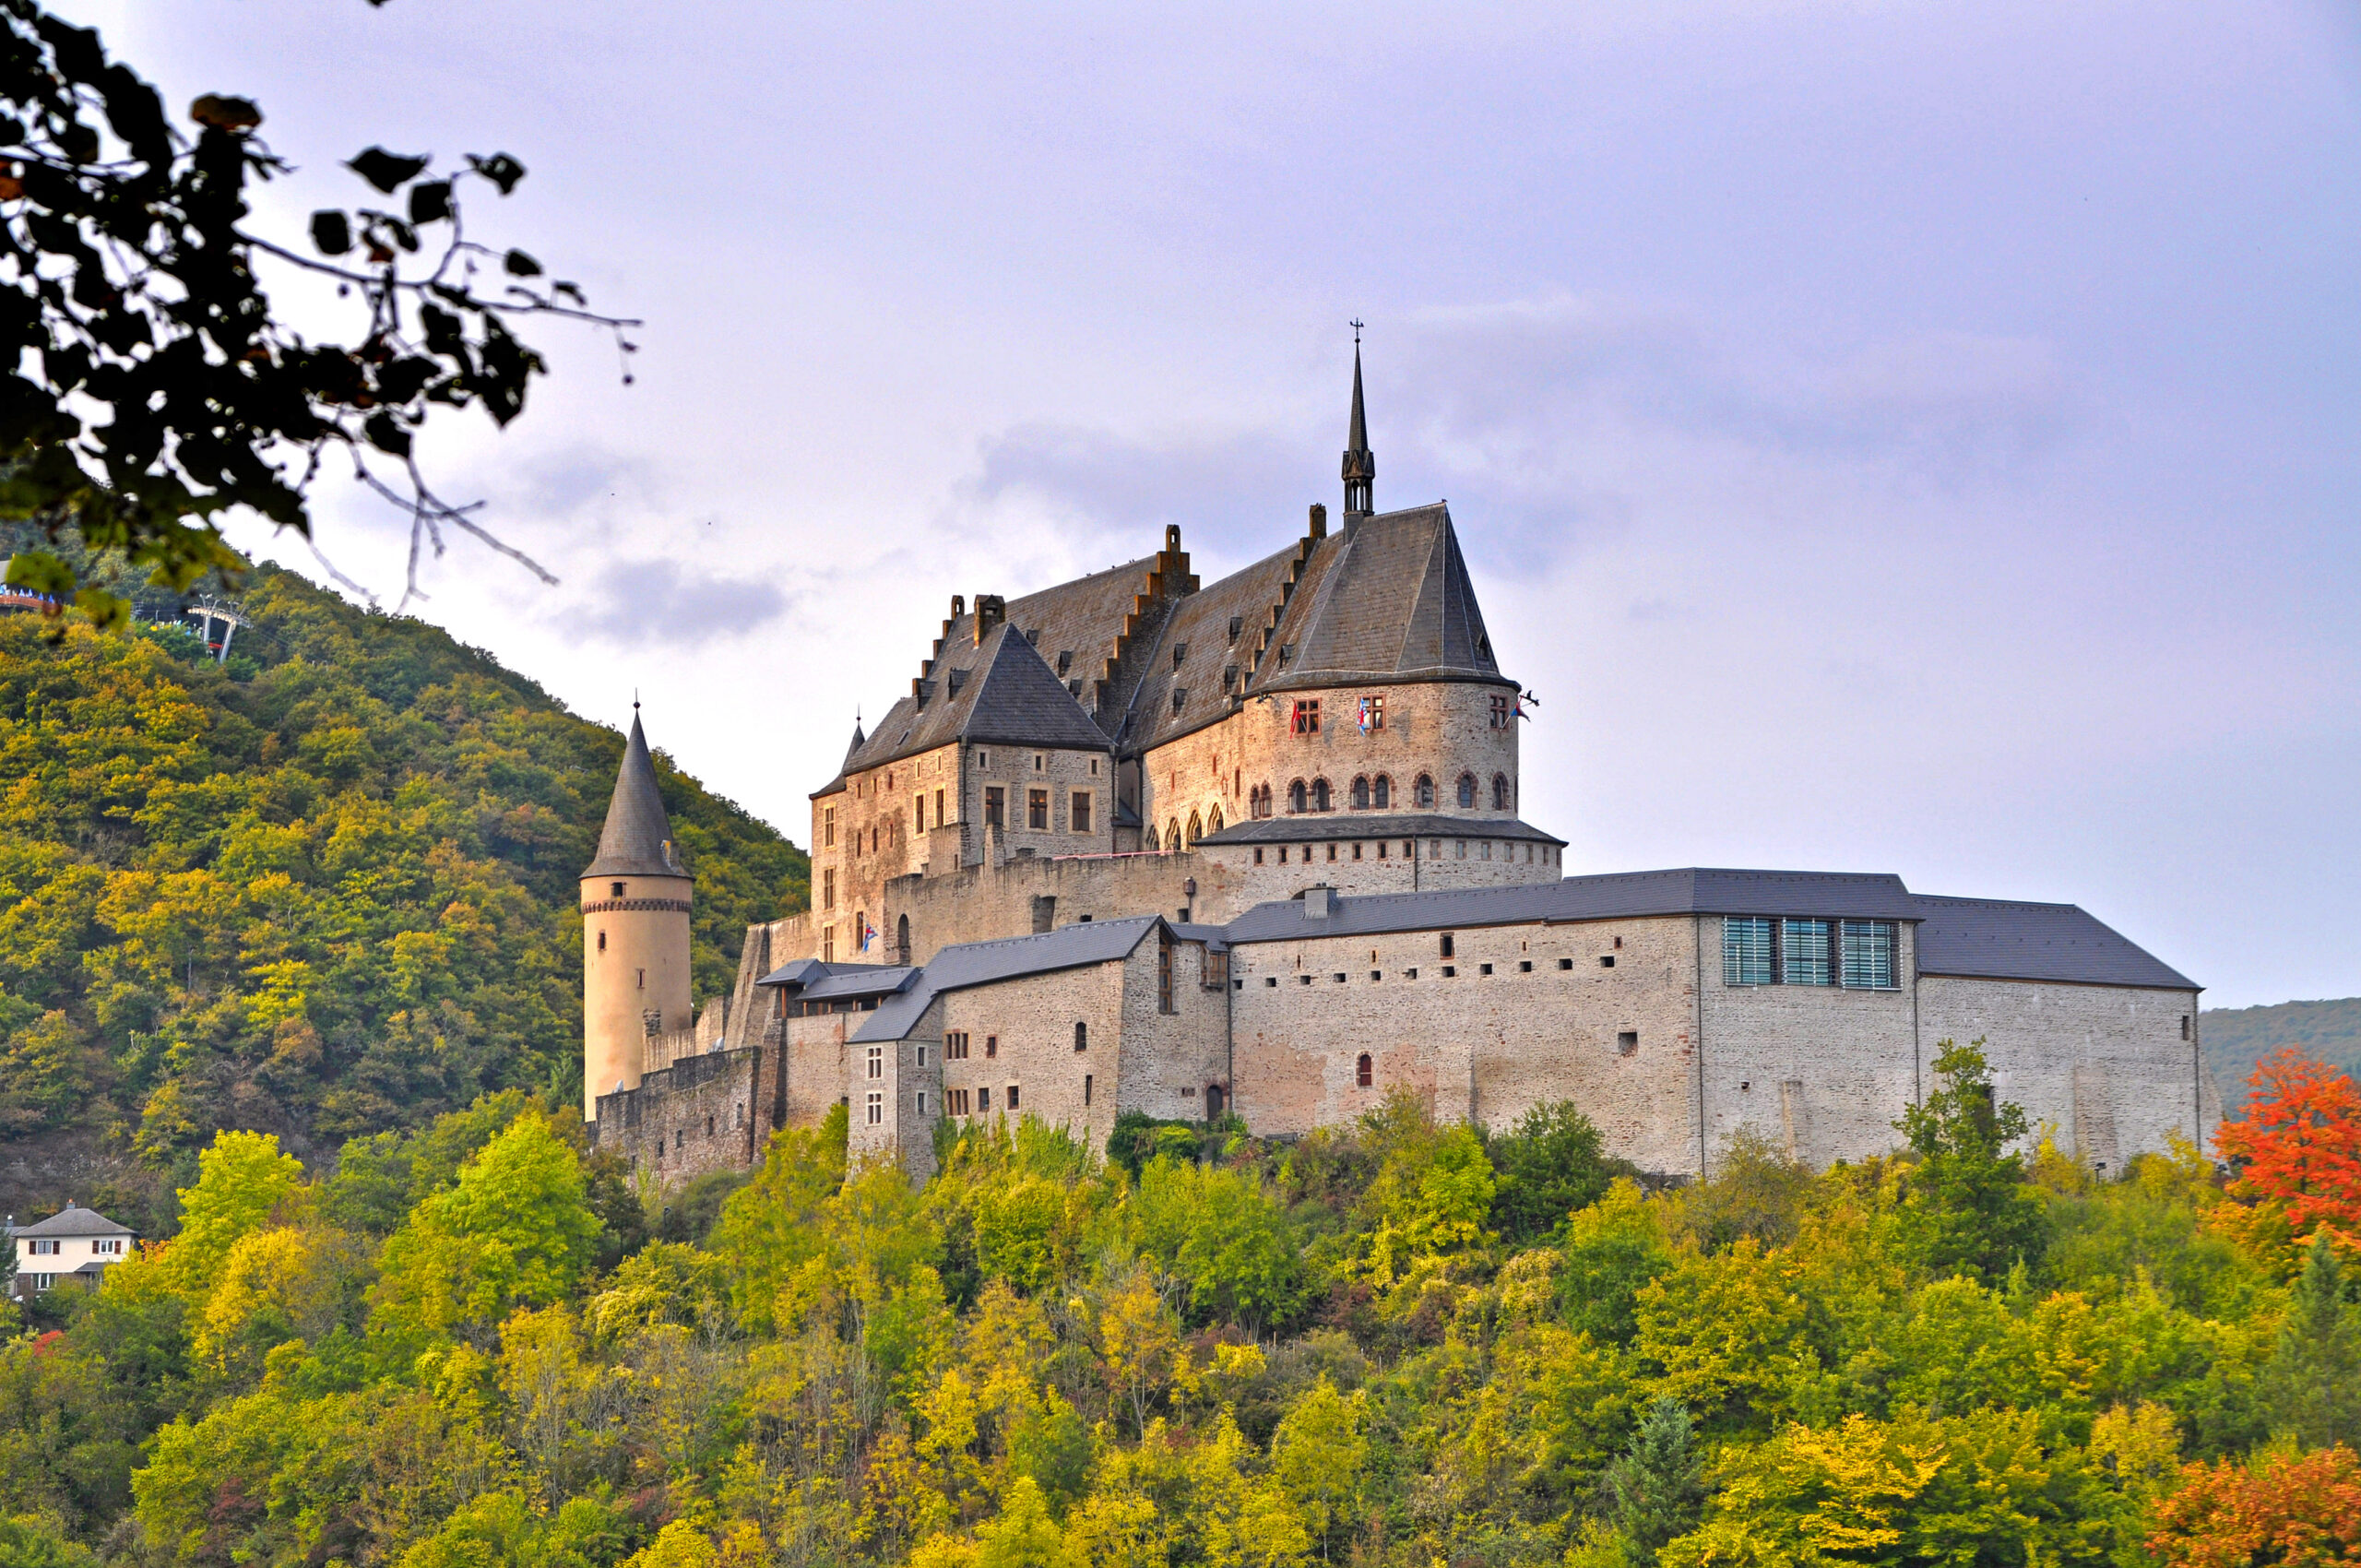 Medieval Castle of Vianden on top of the mountain in Luxembourg